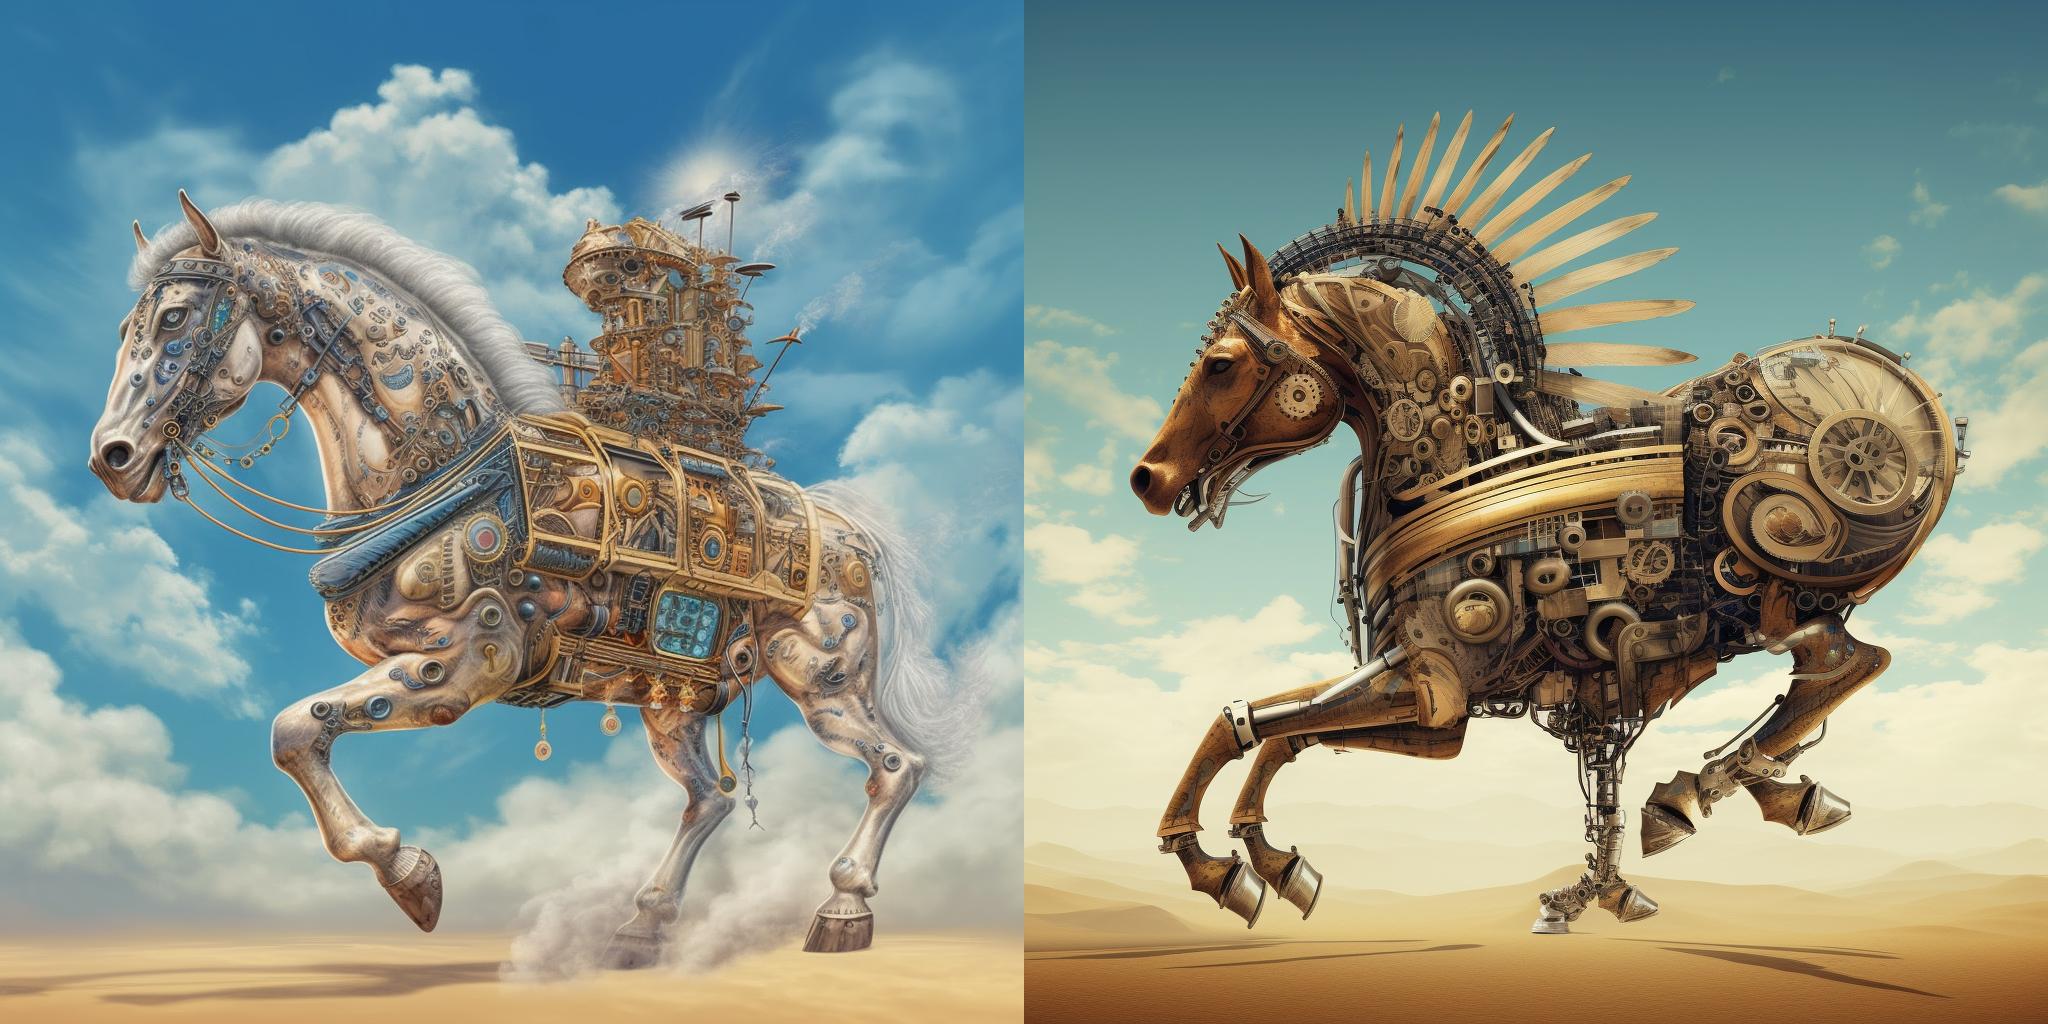 An AI generated image showing two horses made of cogs, each representing artifical intelligence bolting away from us.